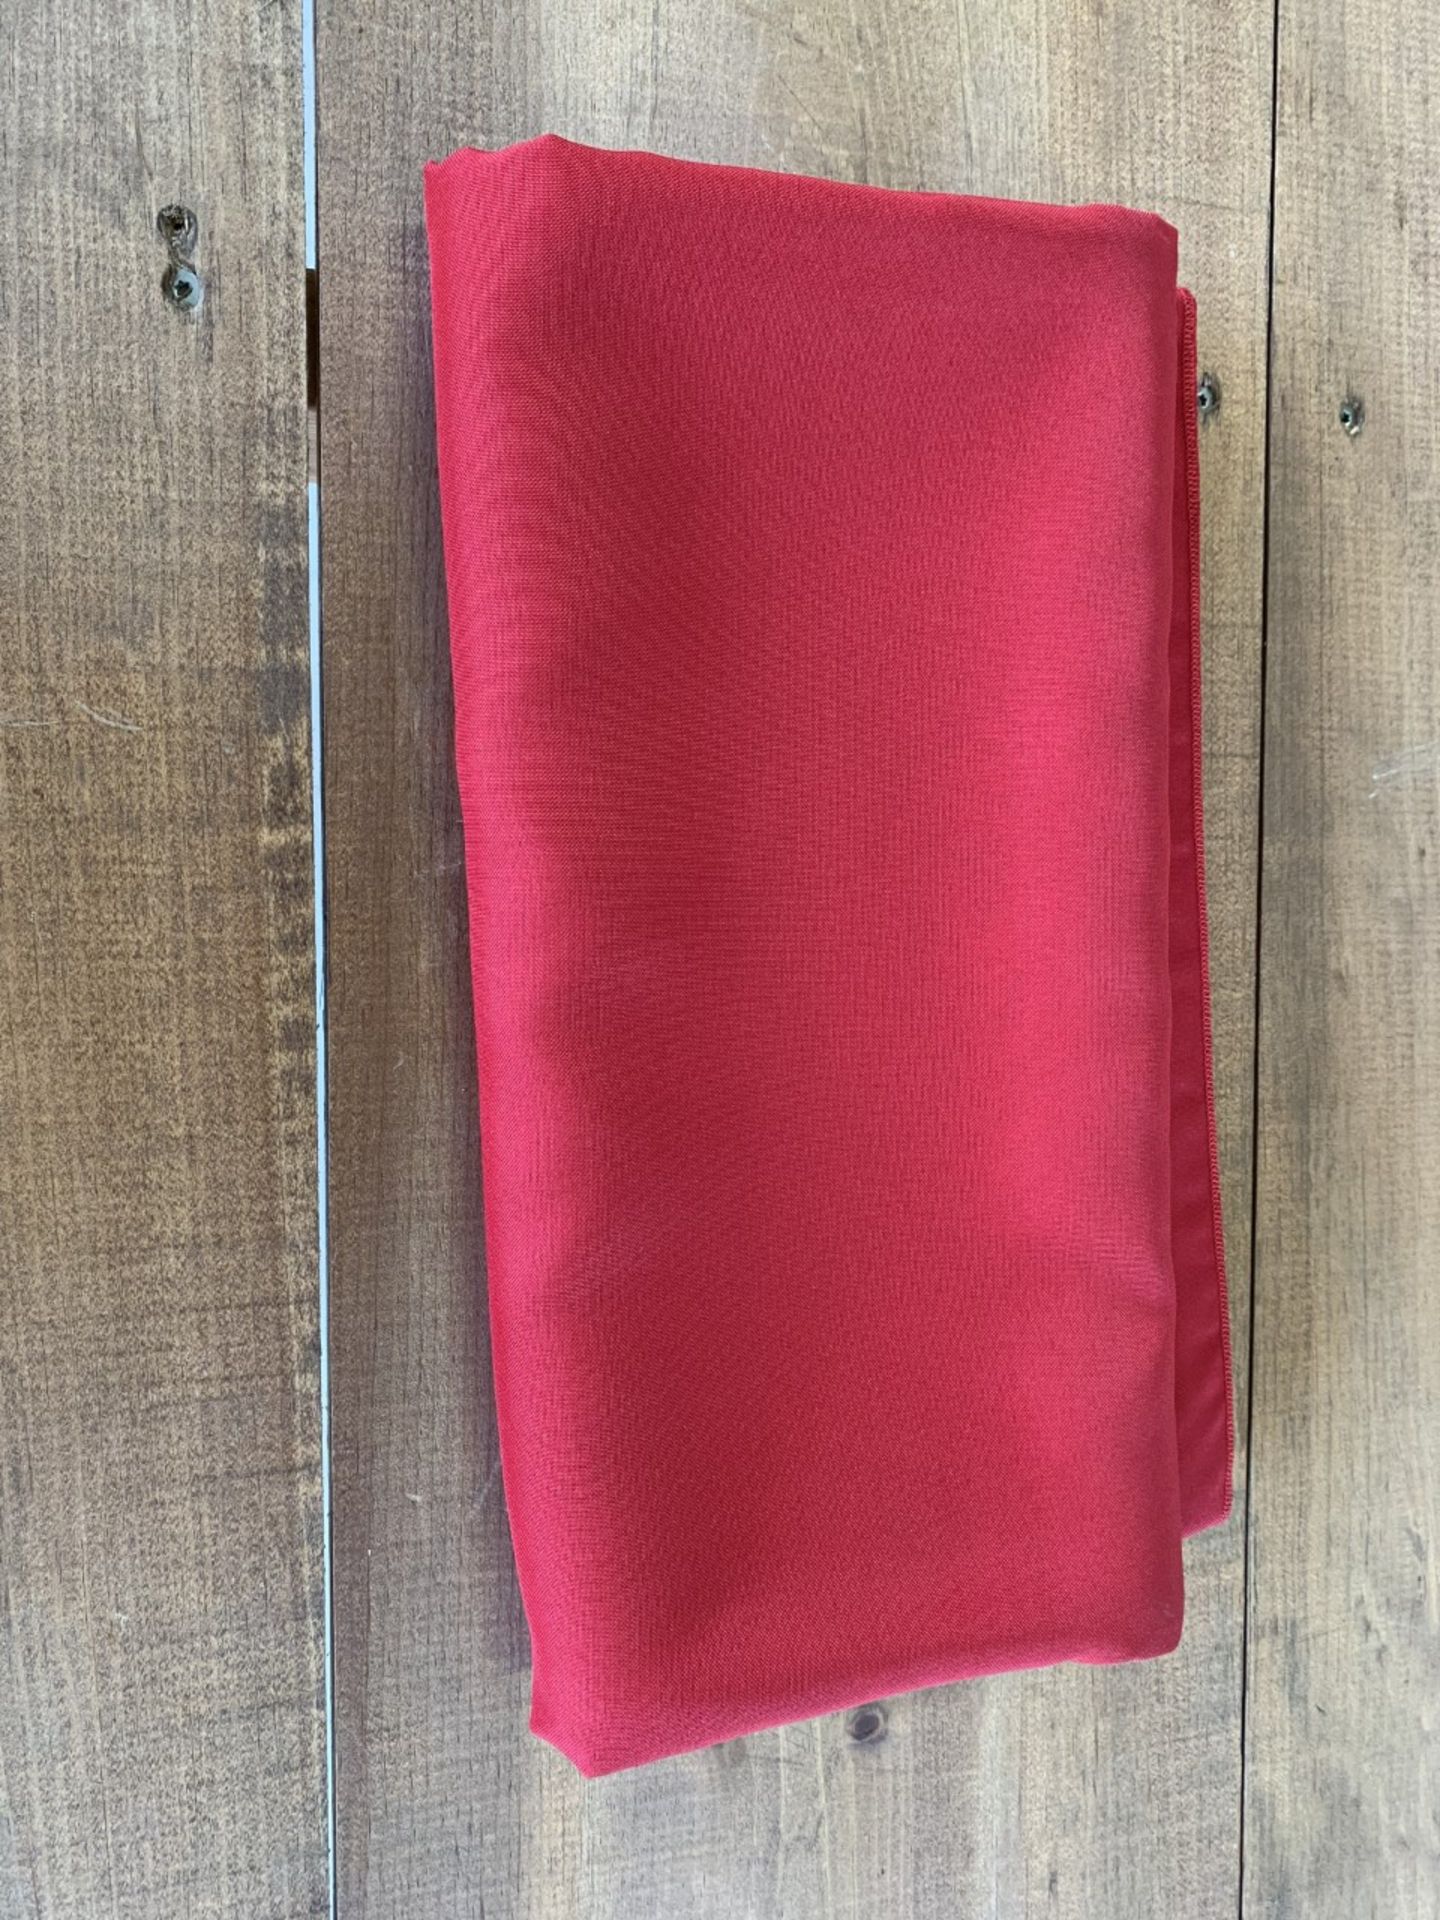 60" x 120" Tablecloth, Cherry Red